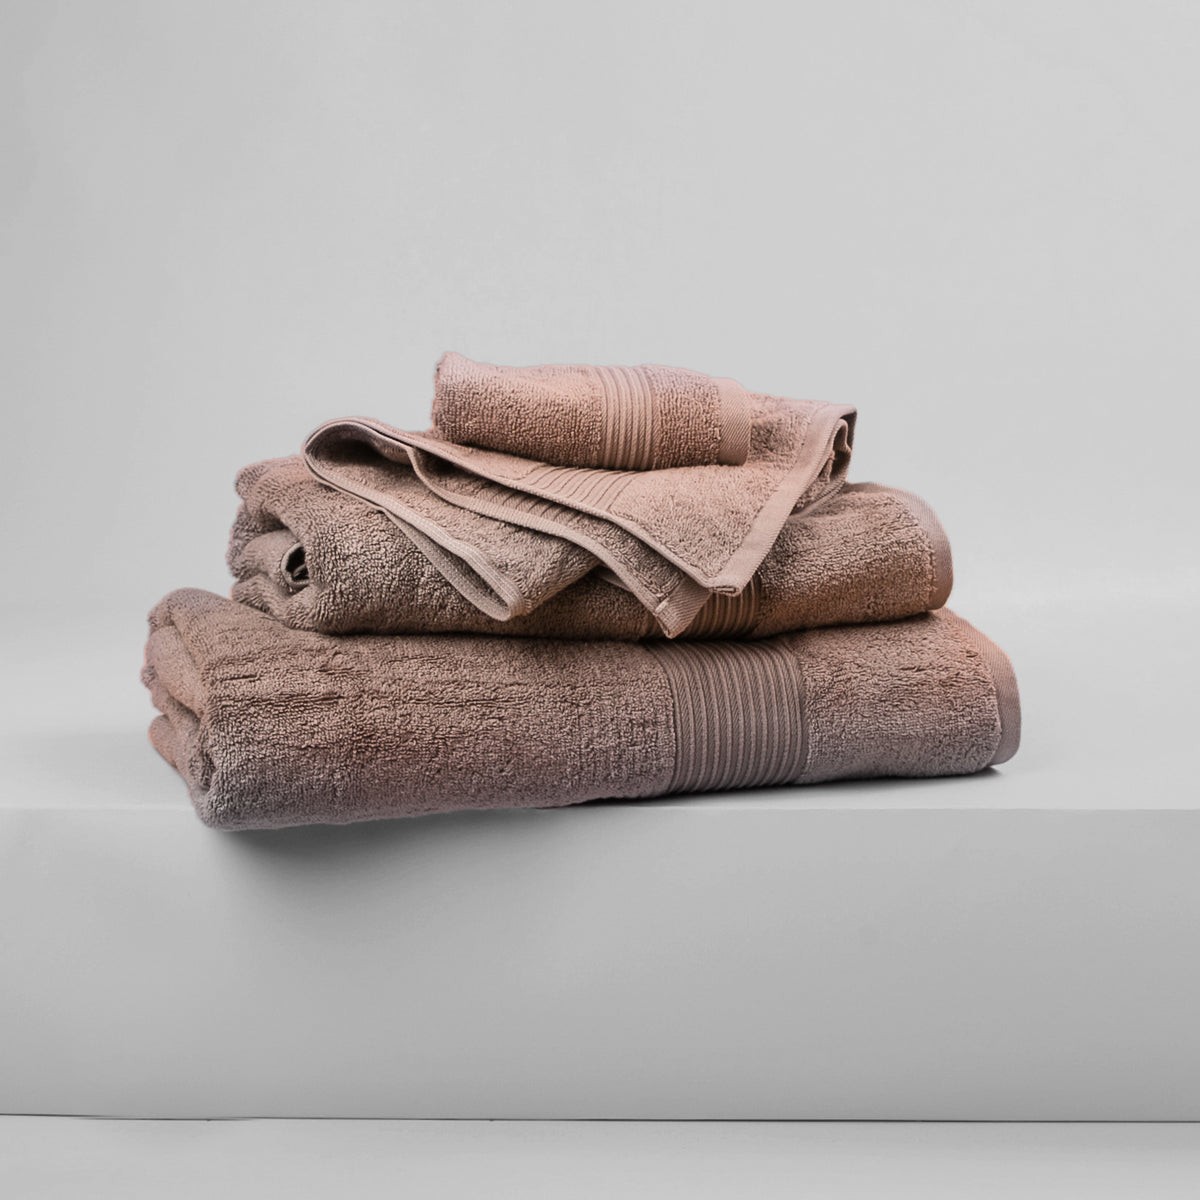 Luxury White 650gsm Hotel-Quality Towels  Tielle Love Luxury – Tielle Love  Luxury by Tradelinens